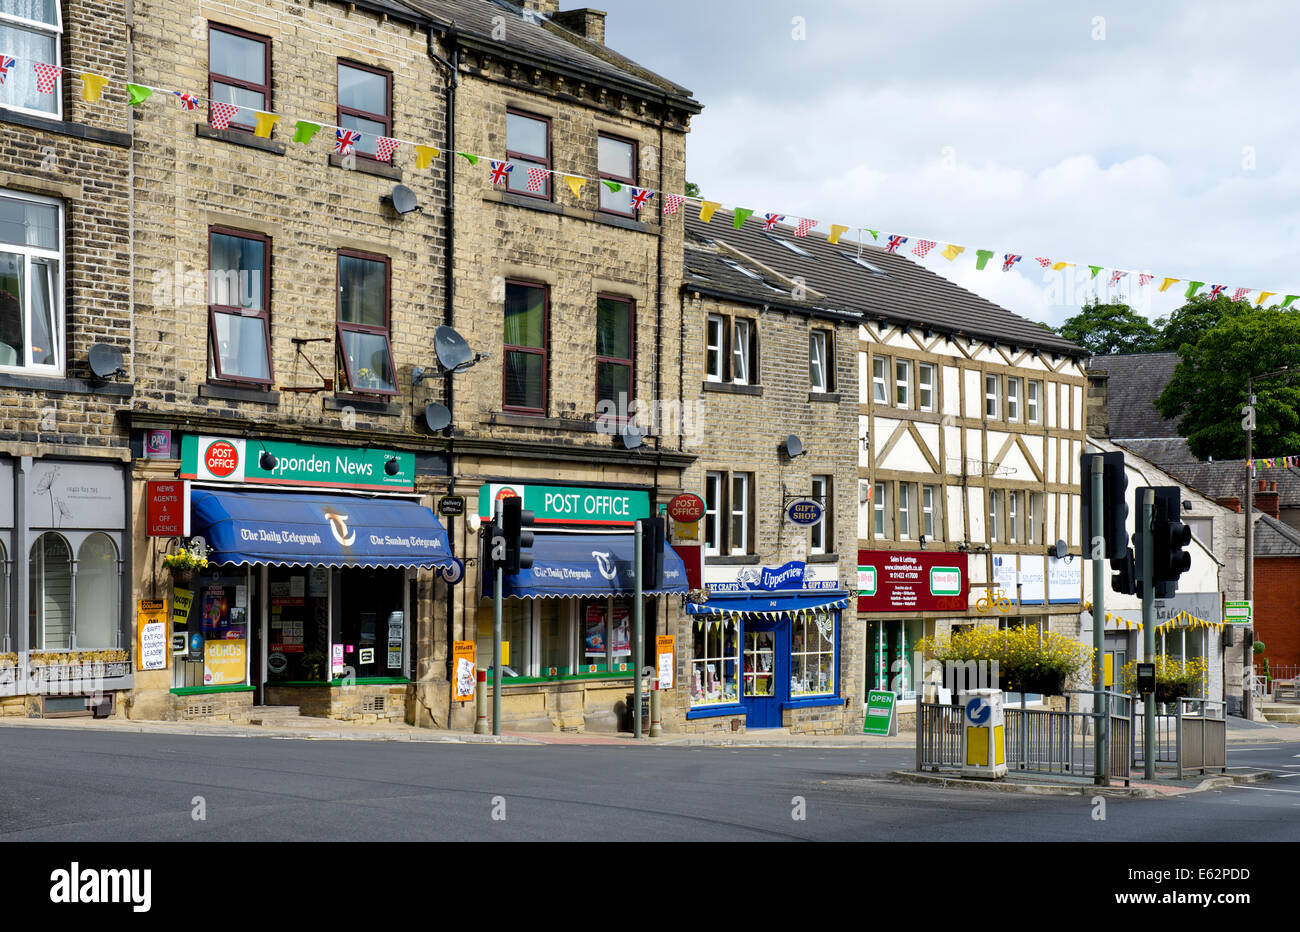 Ripponden High Resolution Stock Photography and Images - Alamy